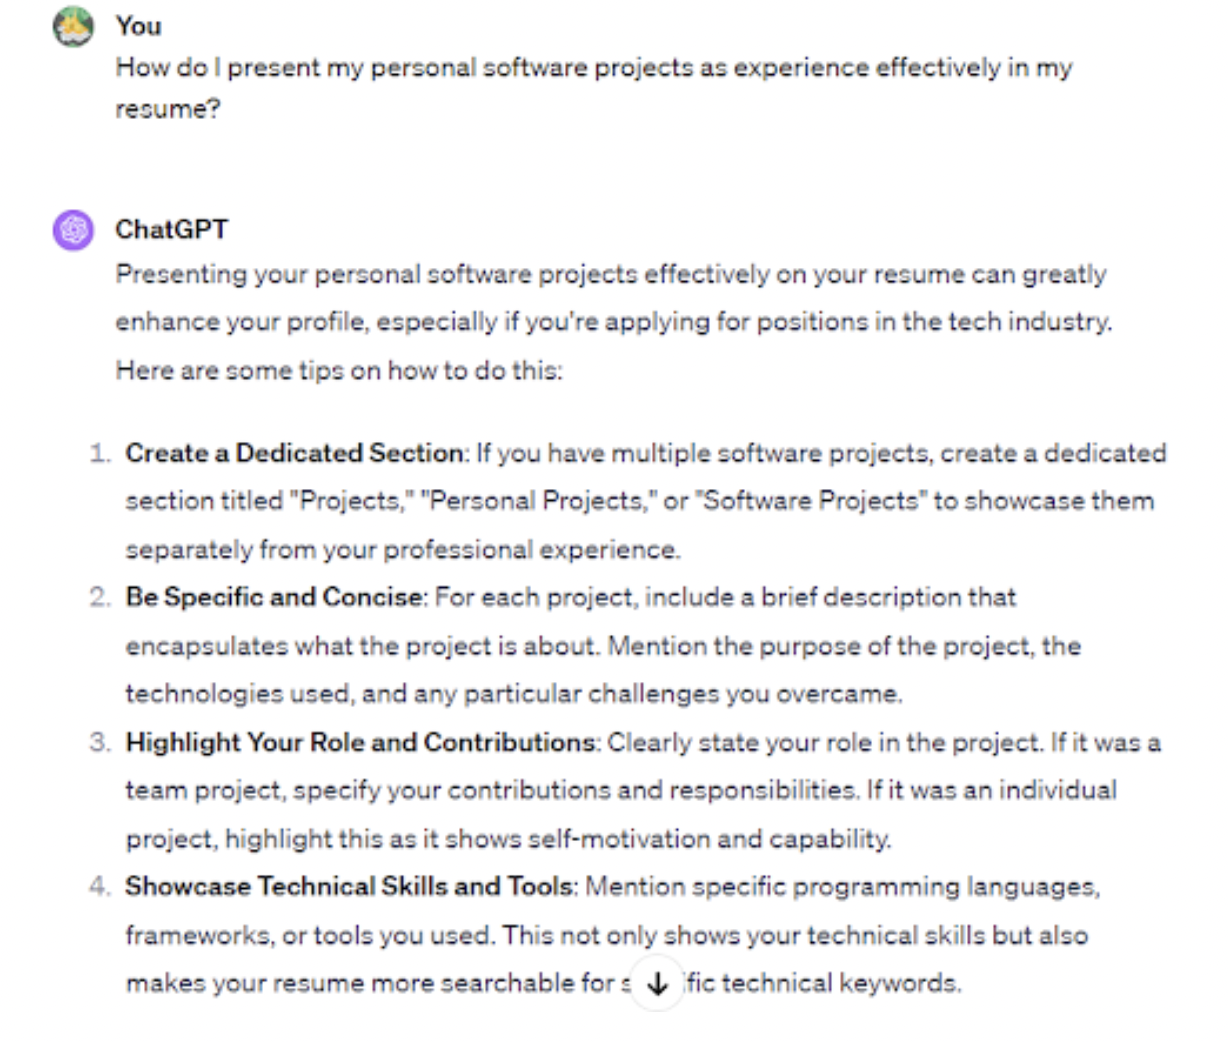 <p>A detailed work experience section highlights your achievements and practical skills. Employers use this section to assess your past experiences when determining if you’d fit the role. Always include a work experience section on your resume, even if you’re just starting.</p><p>If you’re a recent graduate, ChatGPT can act as a career coach and help you frame internships, volunteer and <a href="https://bit.ly/44mJtfs-upwork">freelance work</a>, or personal projects as valuable experiences.</p><p>To illustrate, you can submit a prompt like “How do I present my personal software projects as experience effectively in my resume?” In our case, ChatGPT recommended creating a dedicated section titled “Personal Projects.” You can then highlight the different projects you’ve worked on and provide links for confirmation.</p><p>Other ChatGPT tips included:</p>